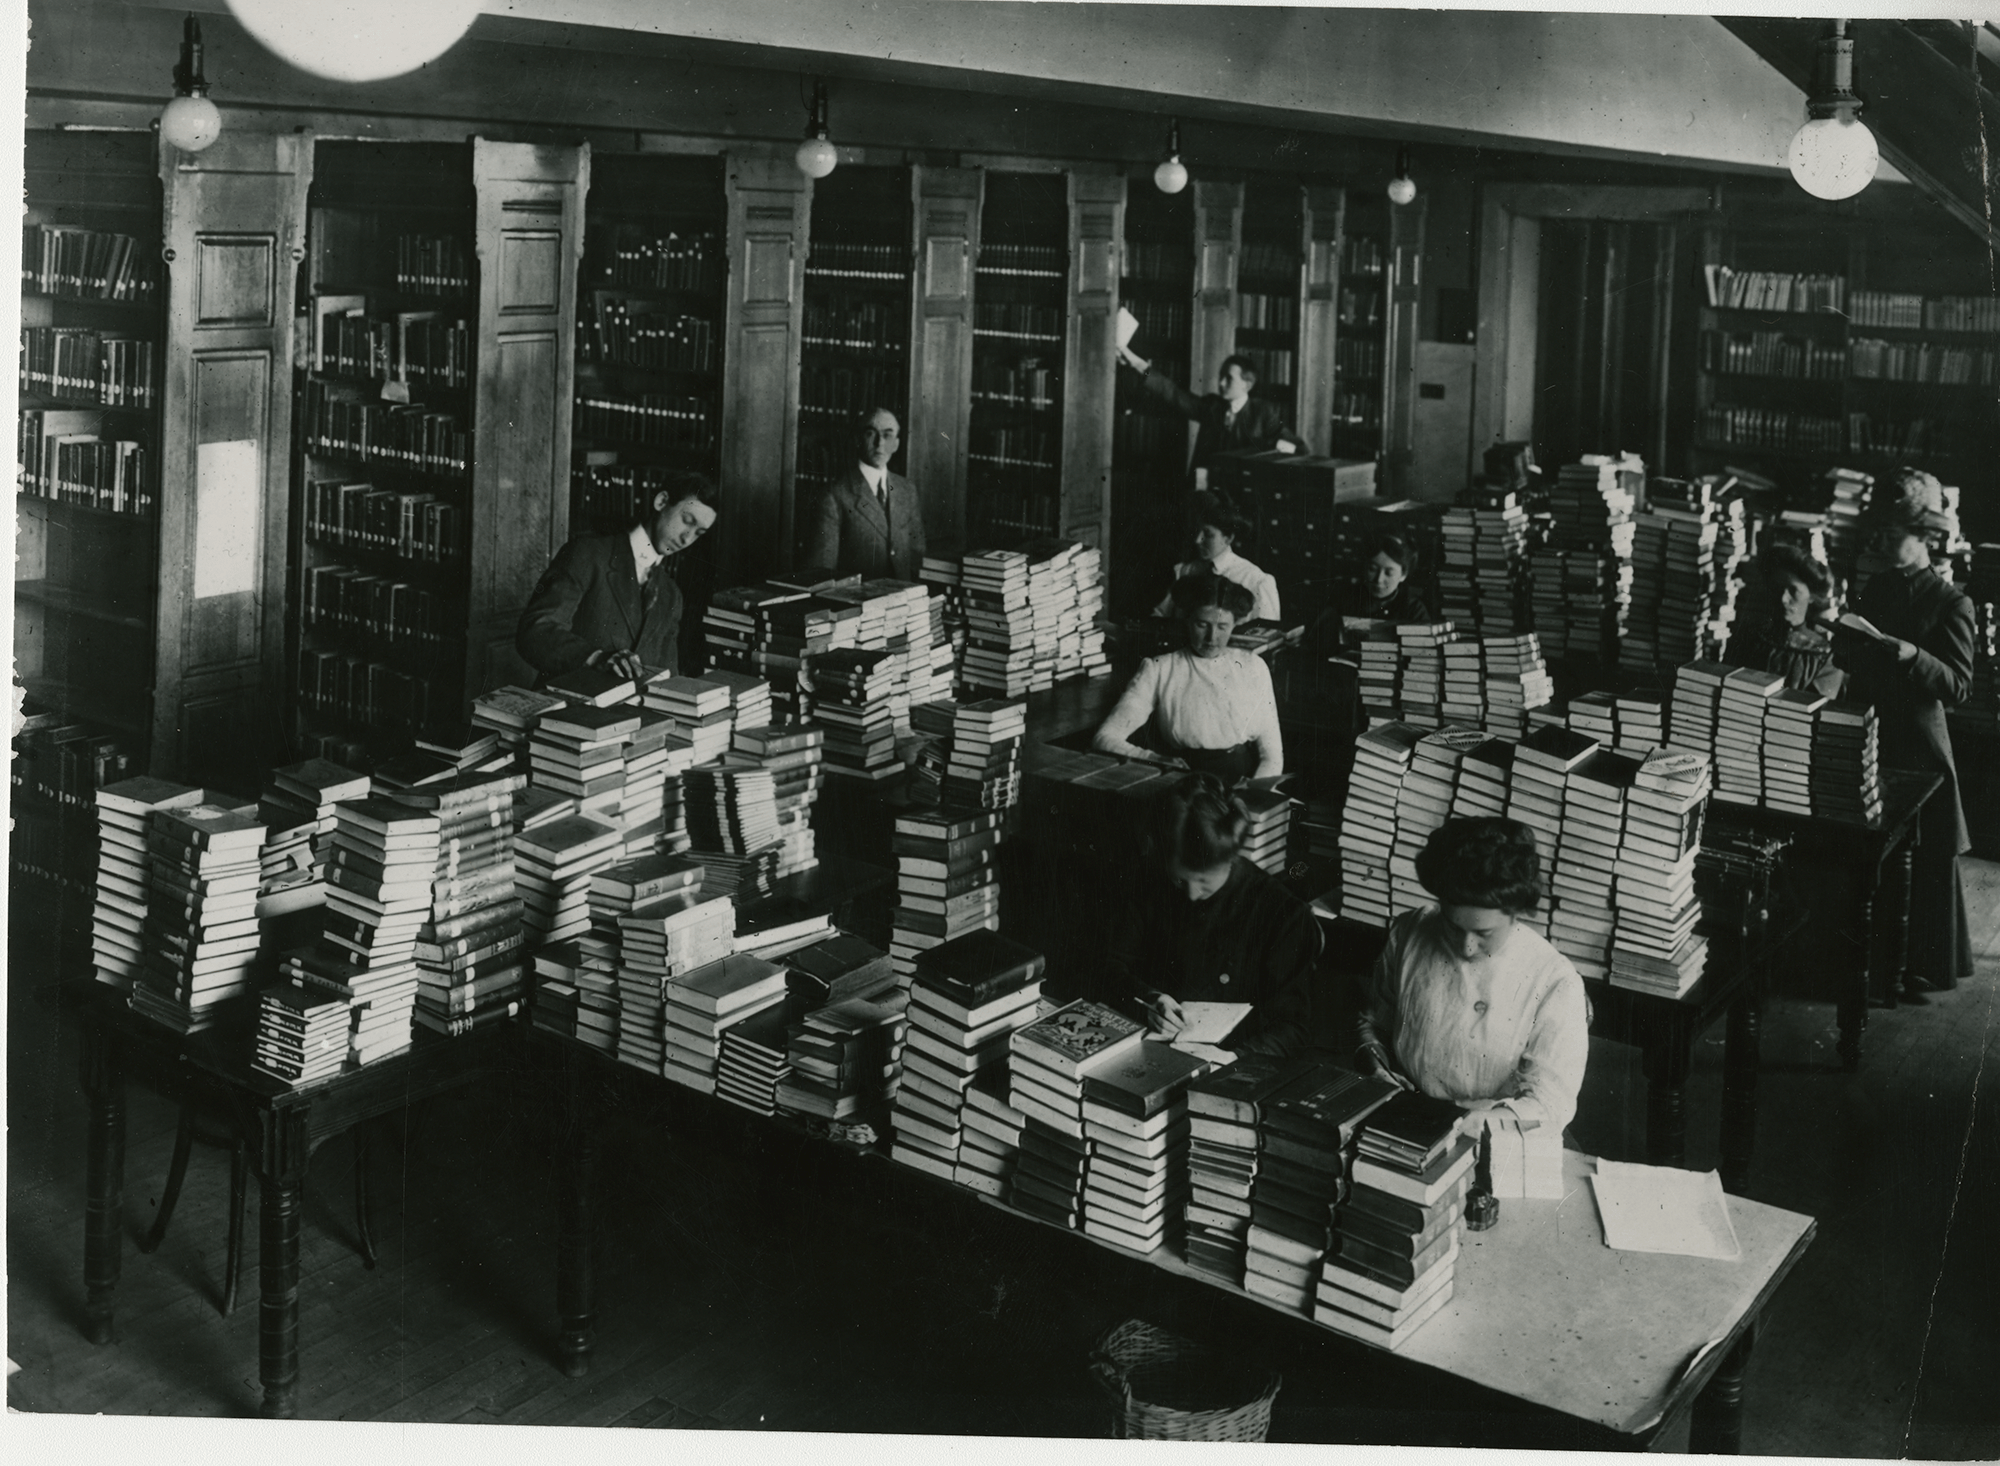 Circa 1905, Central Library staff at work.